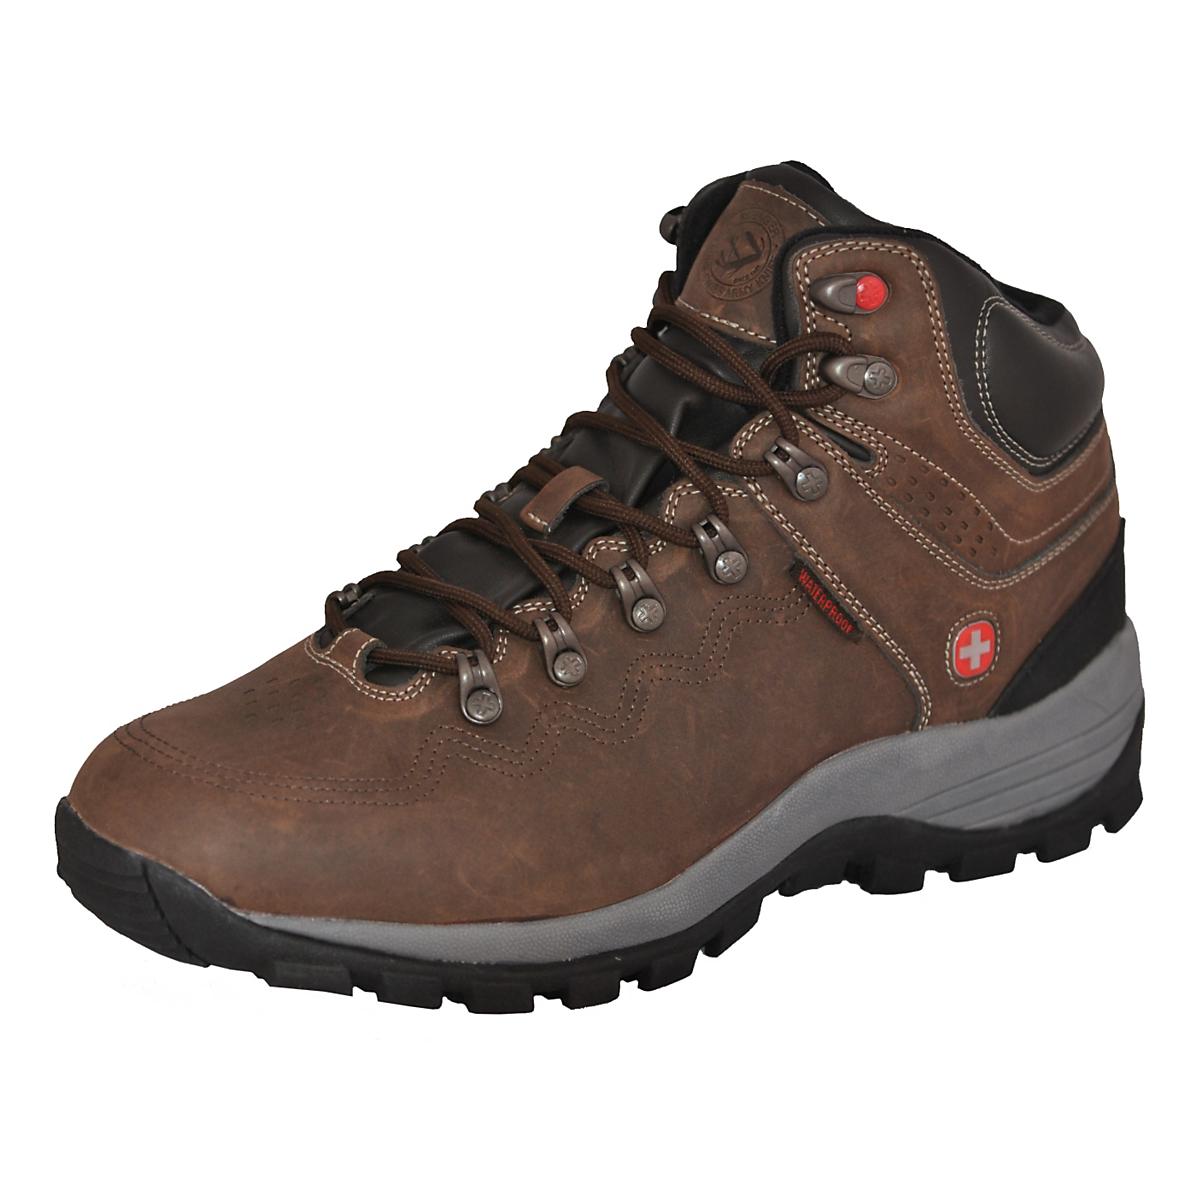 Mens Wenger Swiss Army Outback Hiking Shoe at Road Runner Sports